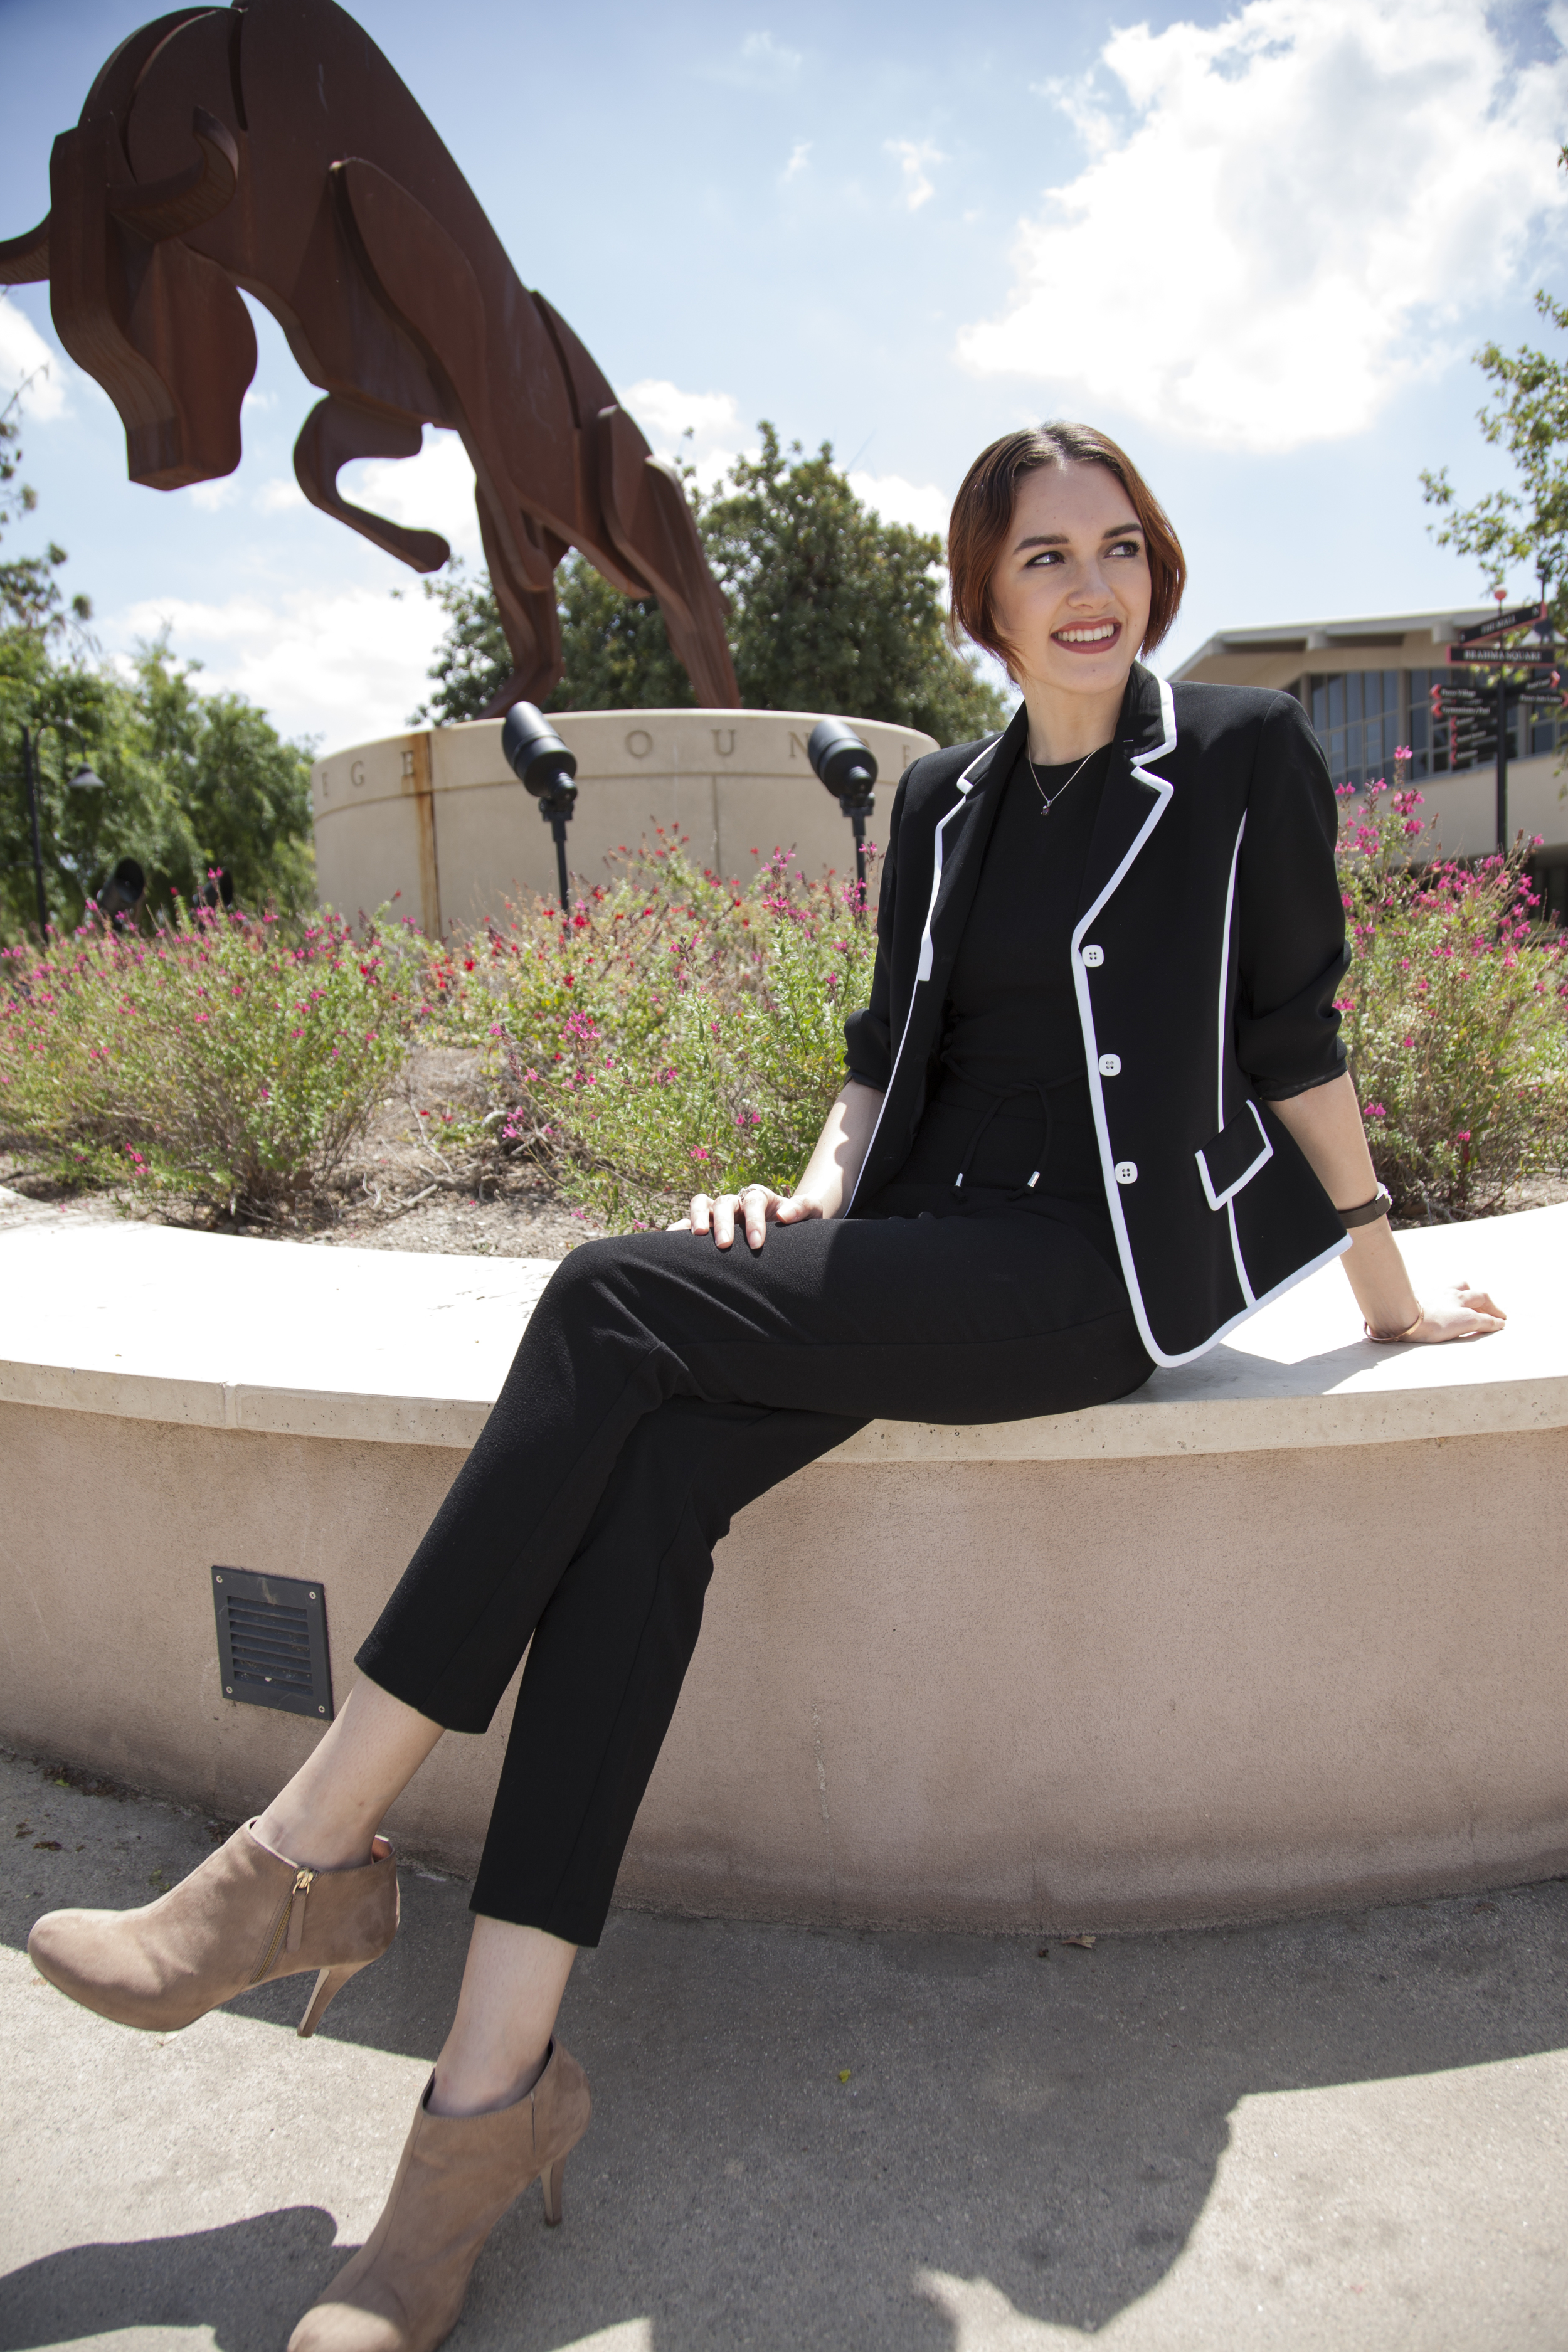  Jamie Daugherty, a 21-year-old communications major, has appeared on shows such as Girls Rock, Luscious Waves, Coco Rocha, and FAB Life. Daugherty sits in front of the Bull sculpture on The Mall of Pierce College on Wednesday, April 20, 2016 in Wood